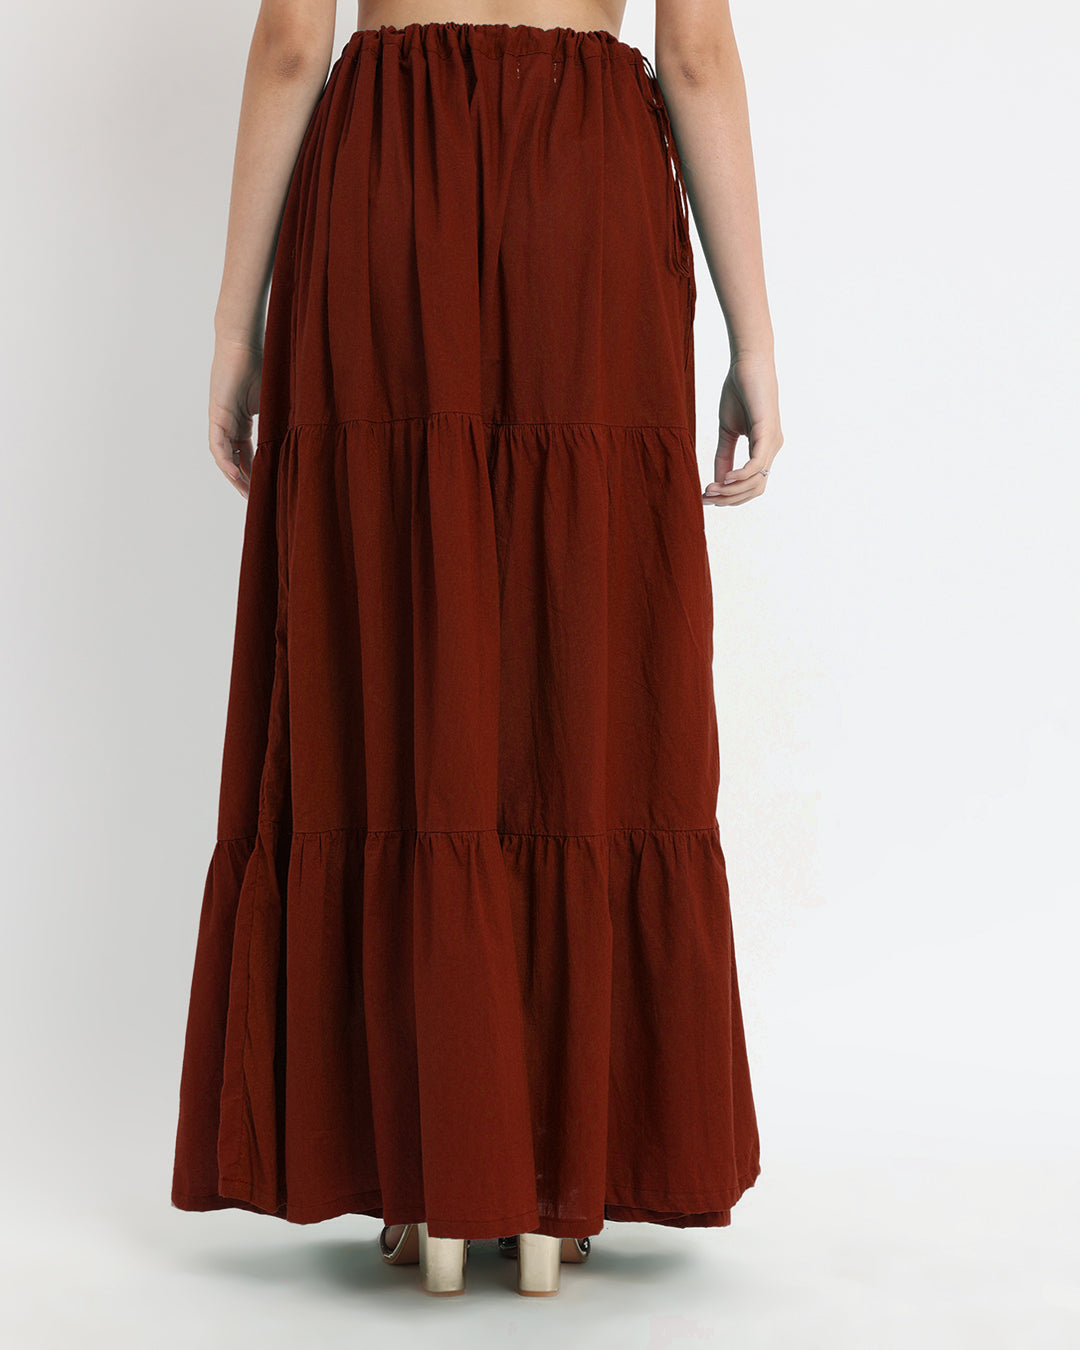 Russet Red Tiered Skirt